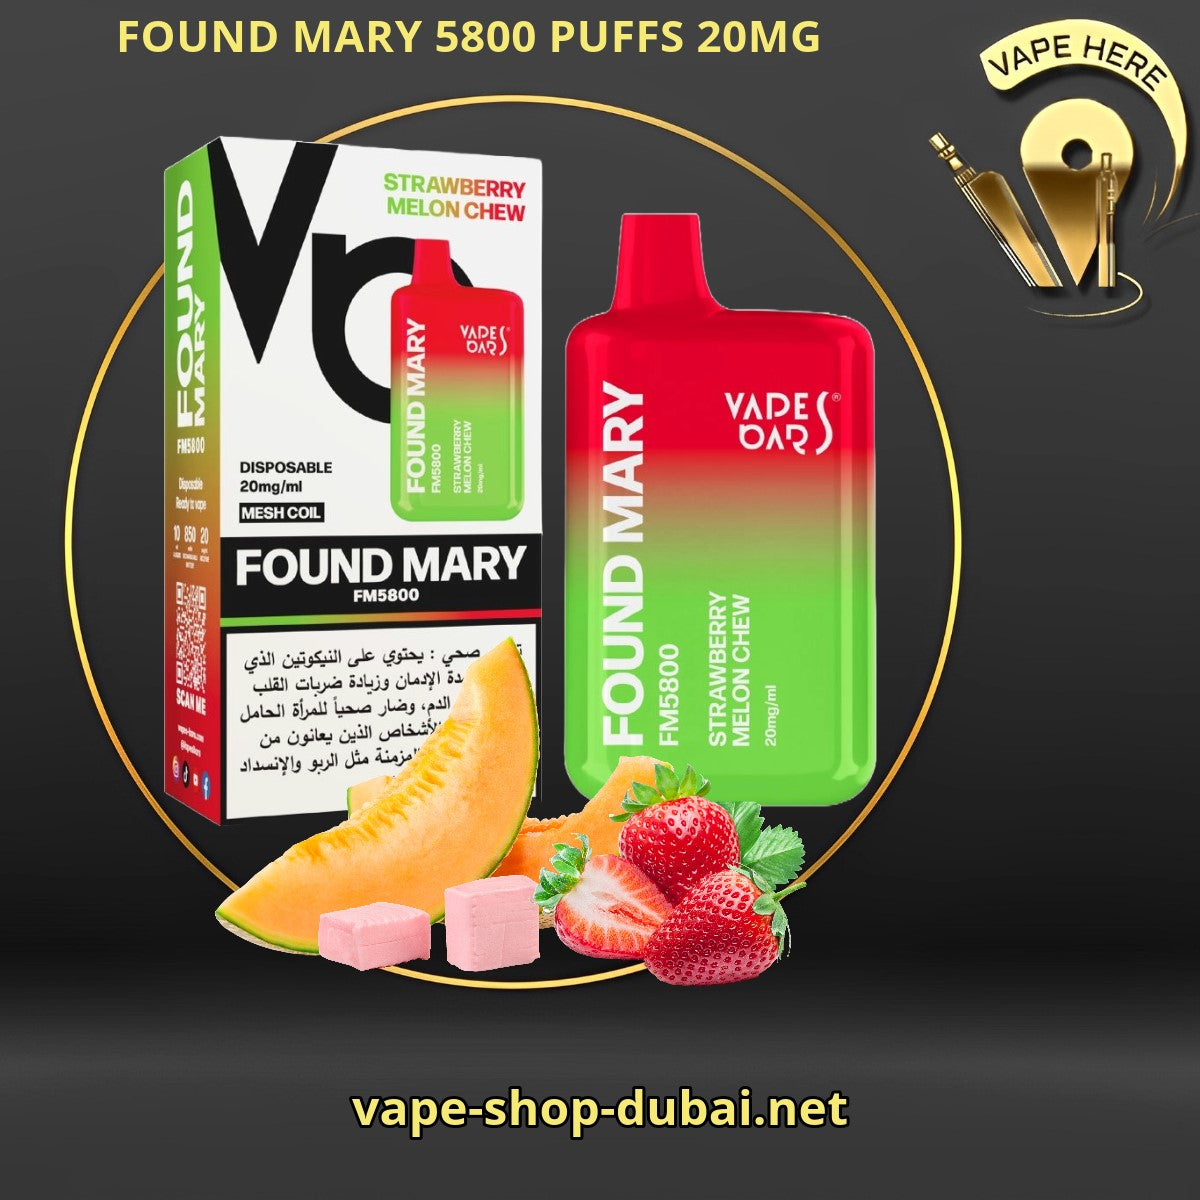 FOUND MARY FM 5800 PUFFS 20MG Strawberry Melon Chew DISPOSABLE VAPE BY VAPE BARS UAE Sharjah